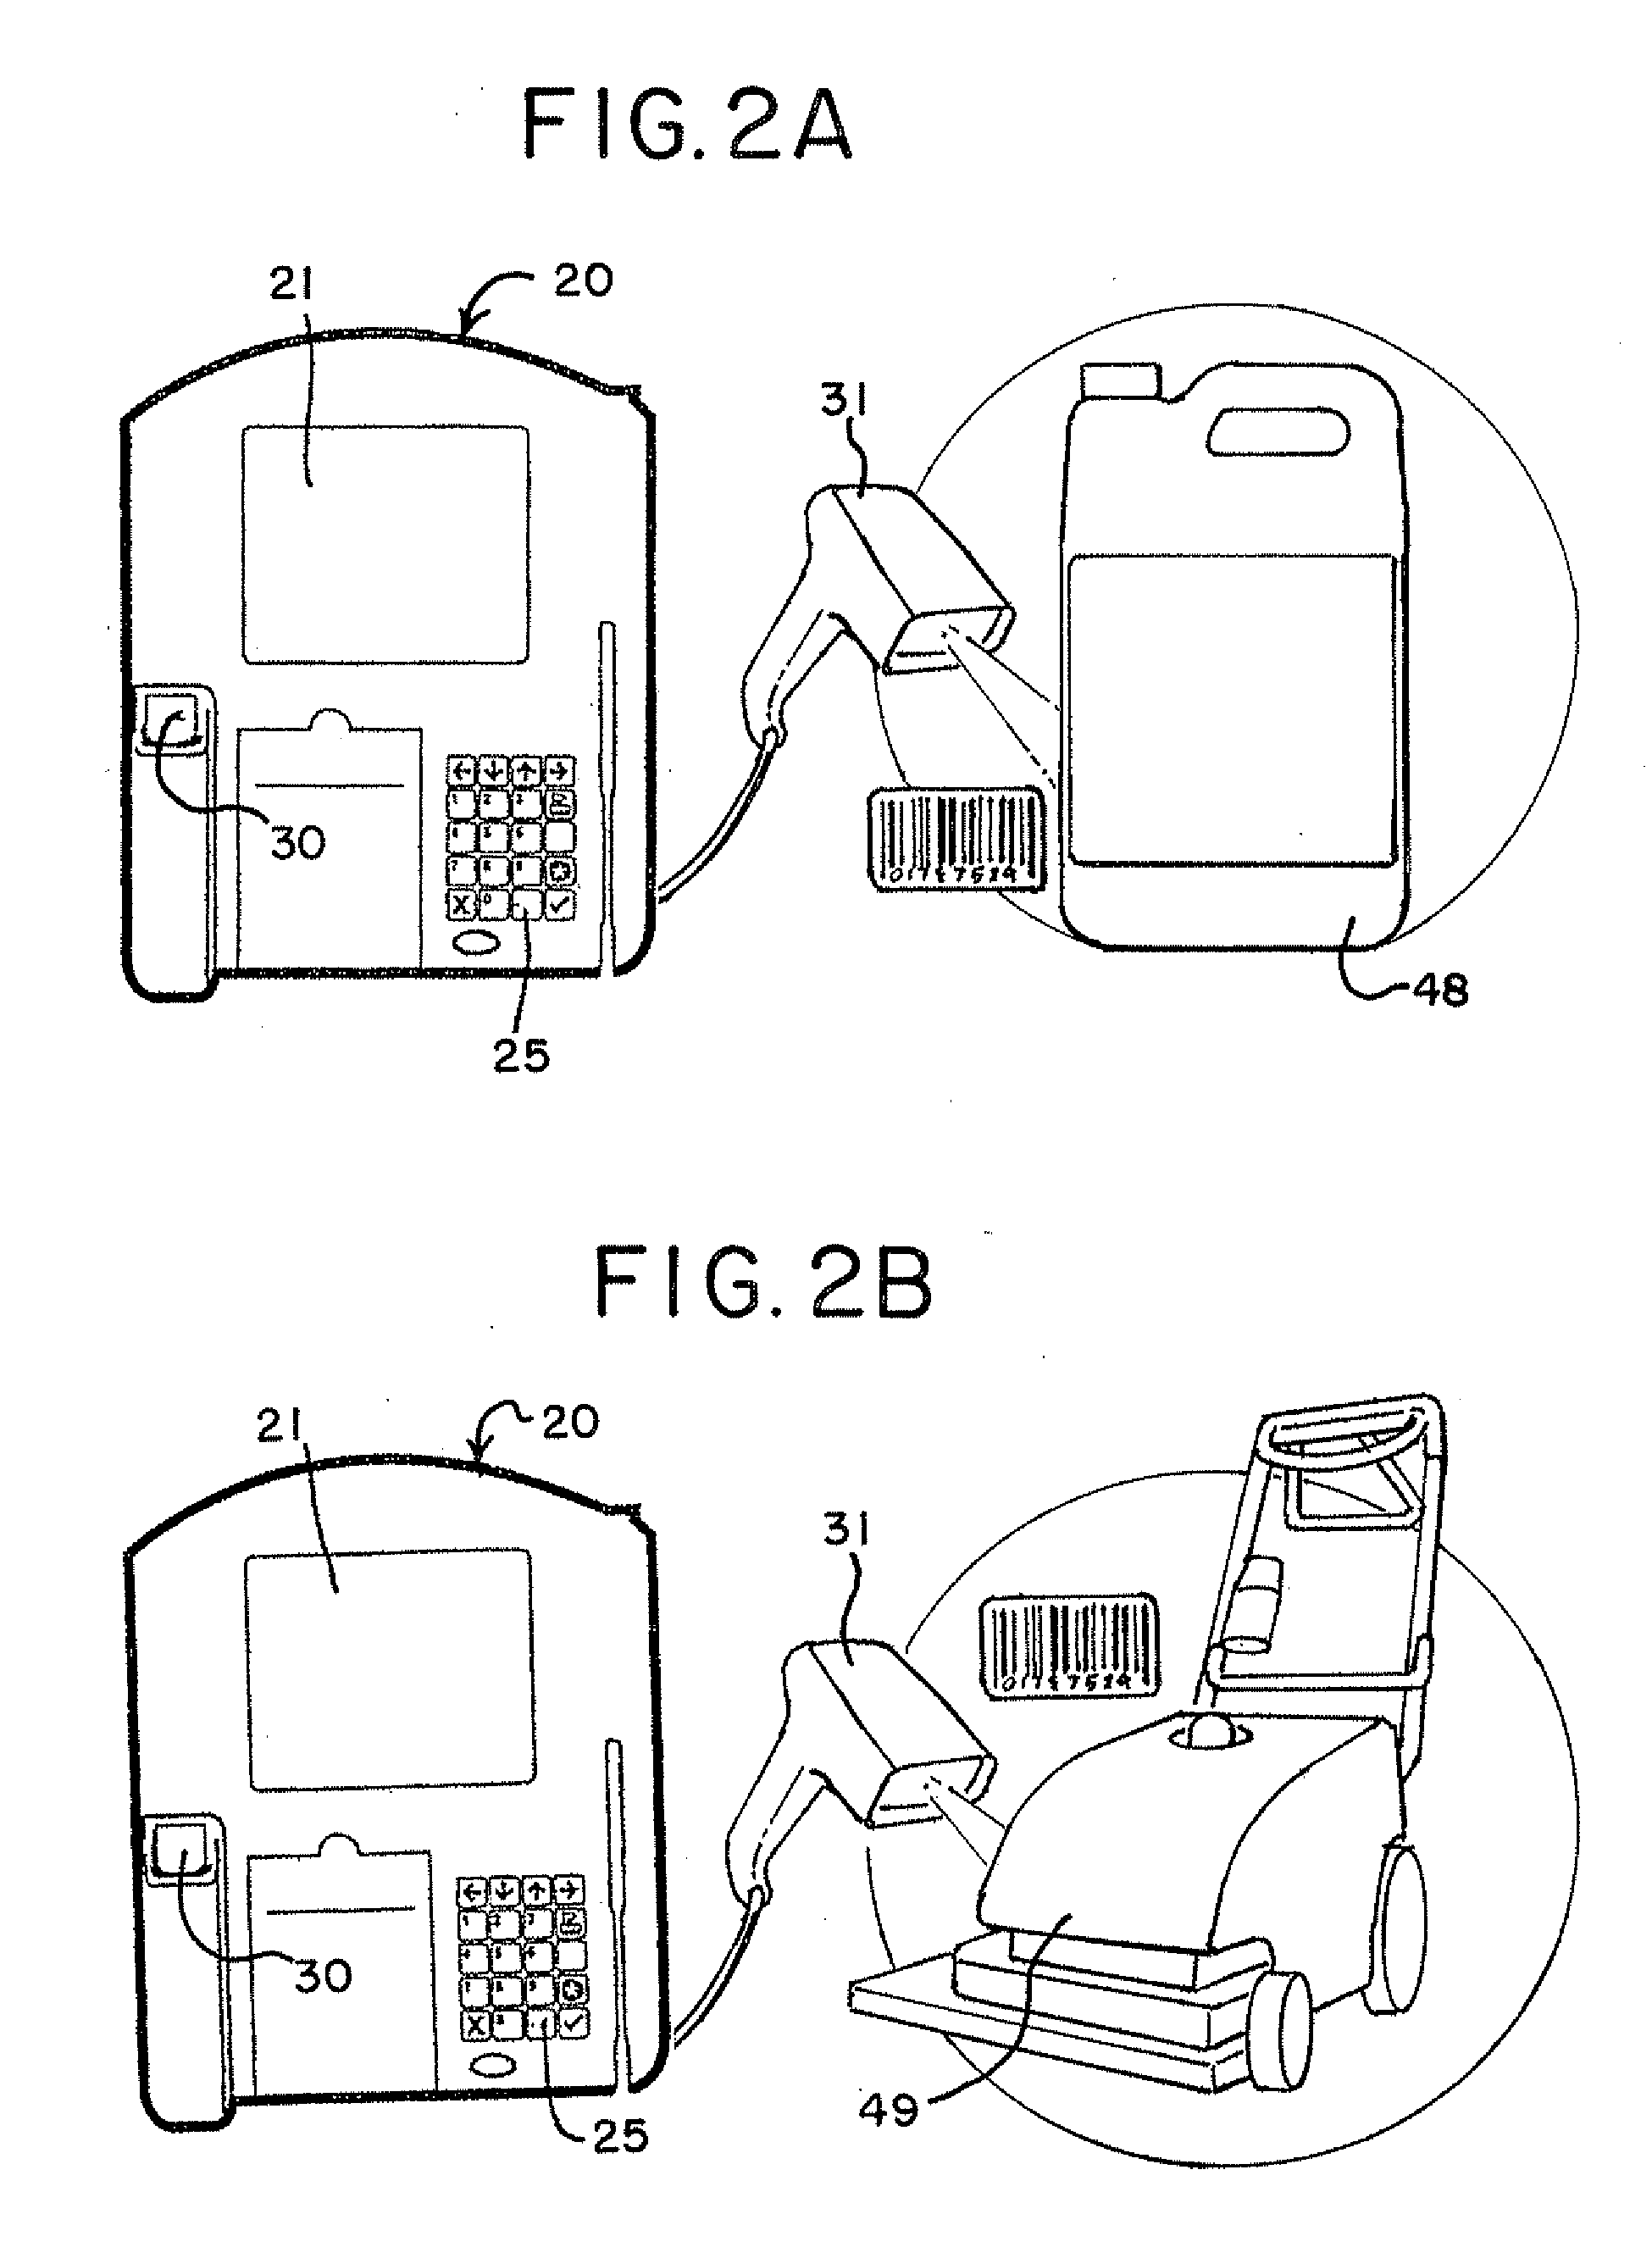 Biometric Multi-Purpose Terminal, Payroll and Work Management System and Related Methods